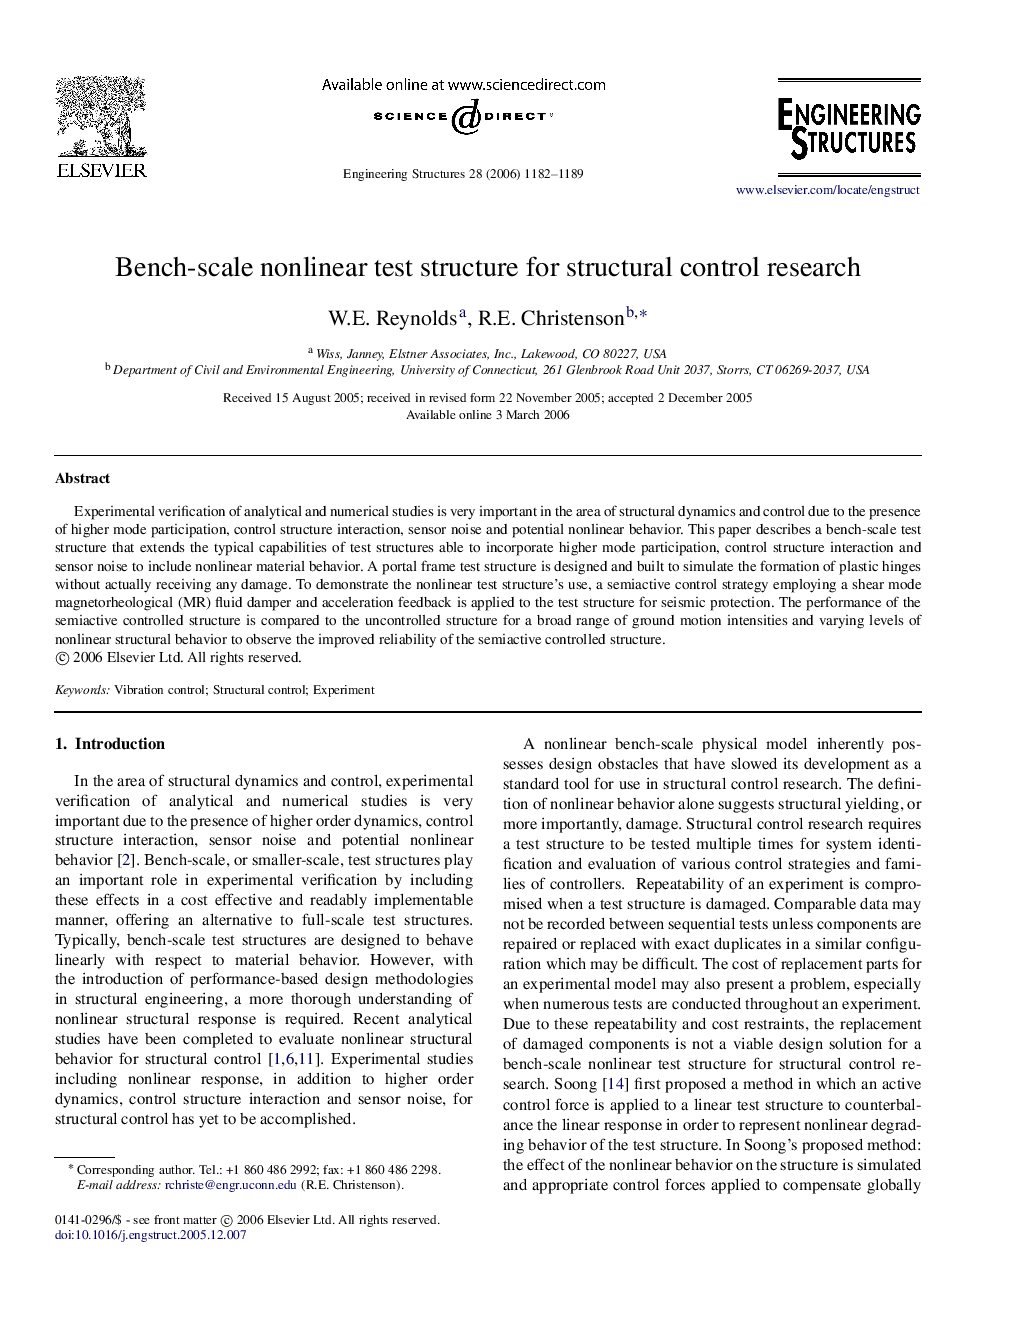 Bench-scale nonlinear test structure for structural control research